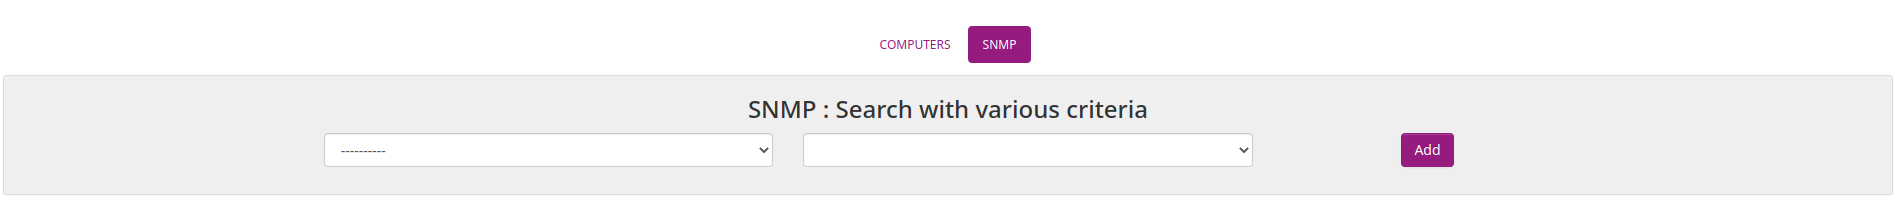 SNMP Inventory multisearch tab